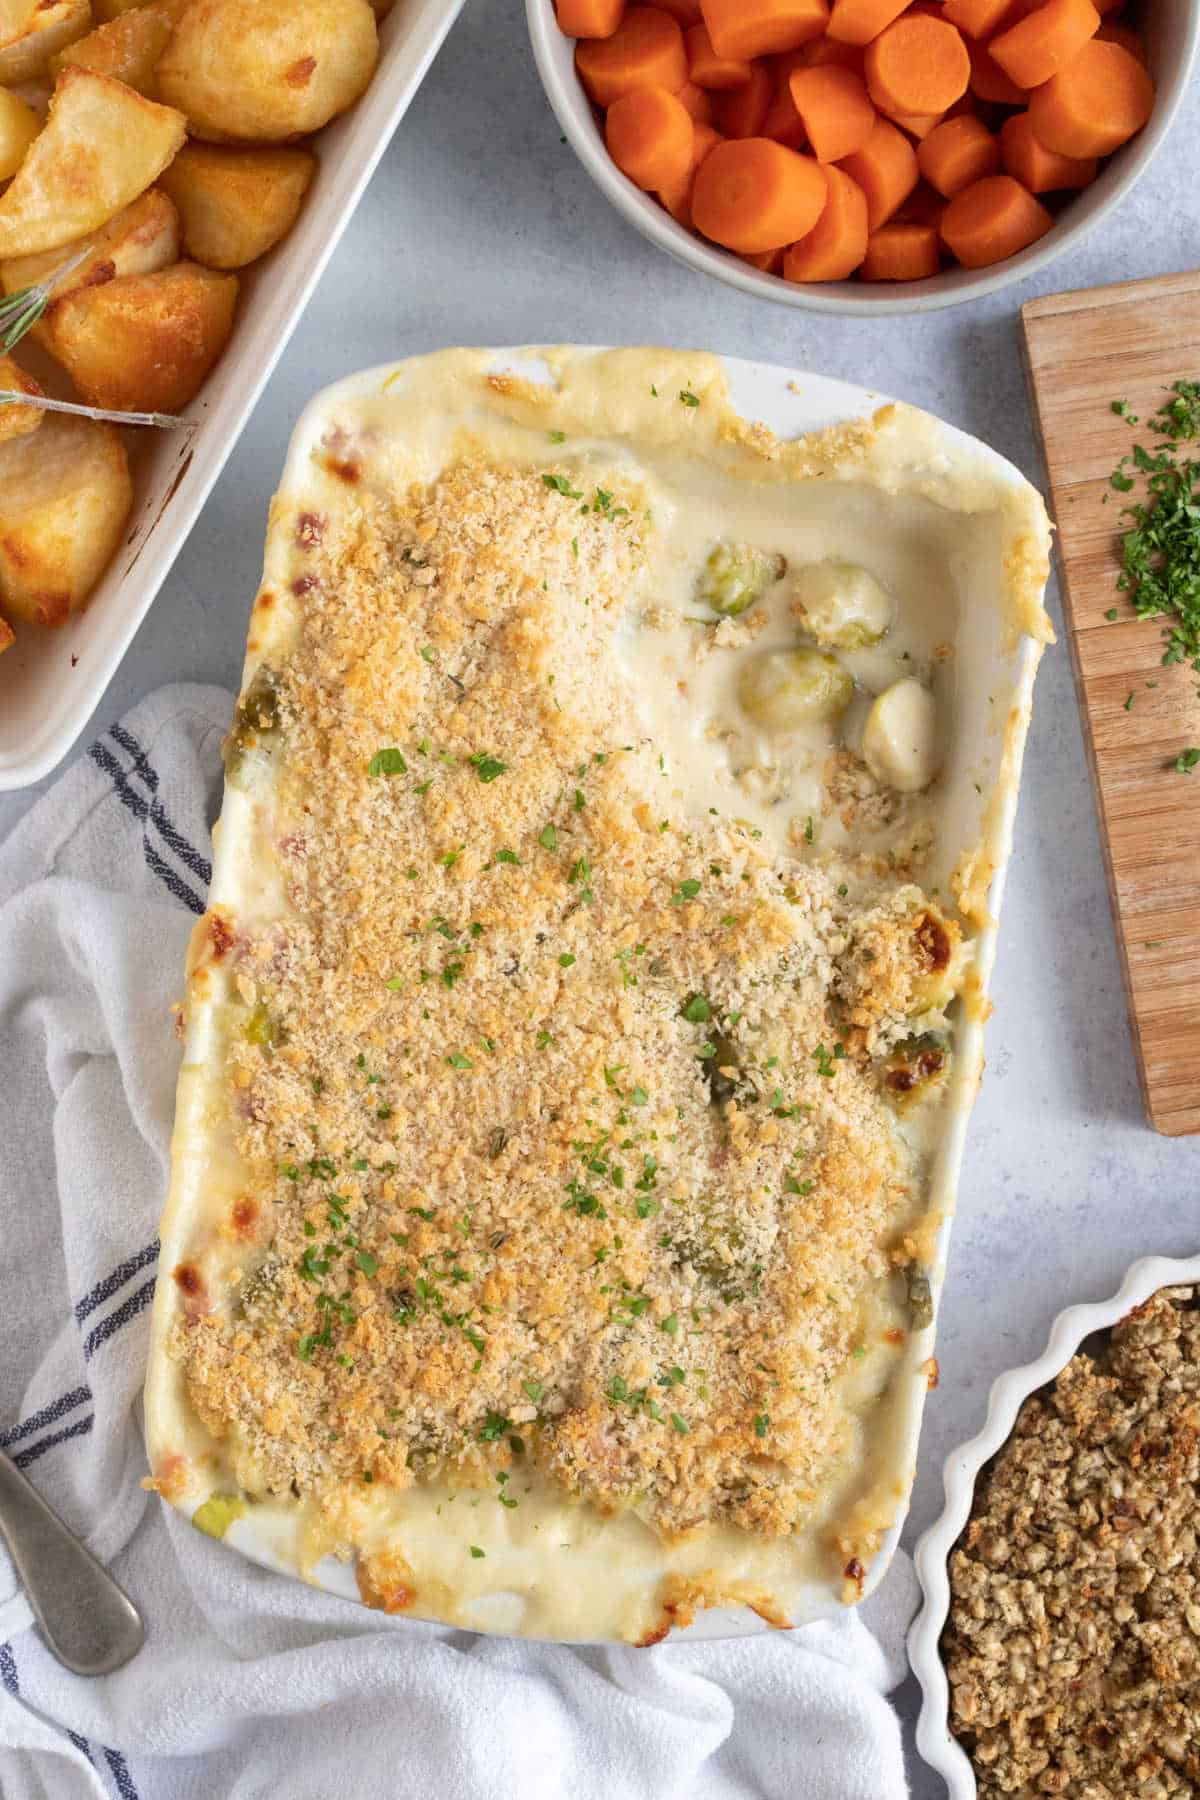 Cheesy sprout gratin in a baking dish with a bowl of carrots and roast potatoes.